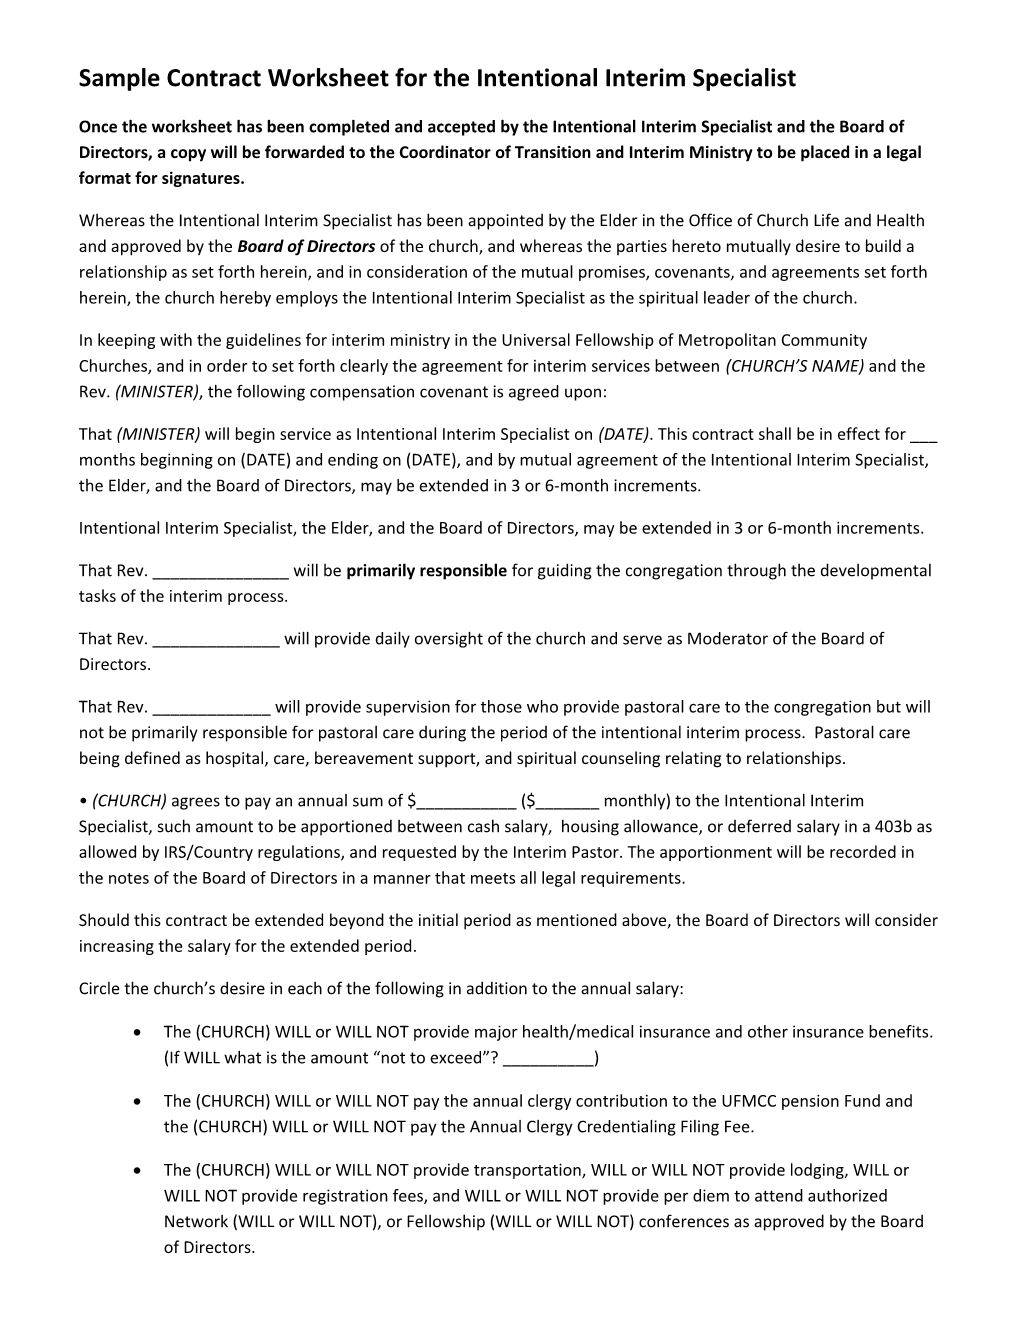 Sample Contractworksheet for Theintentional Interim Specialist